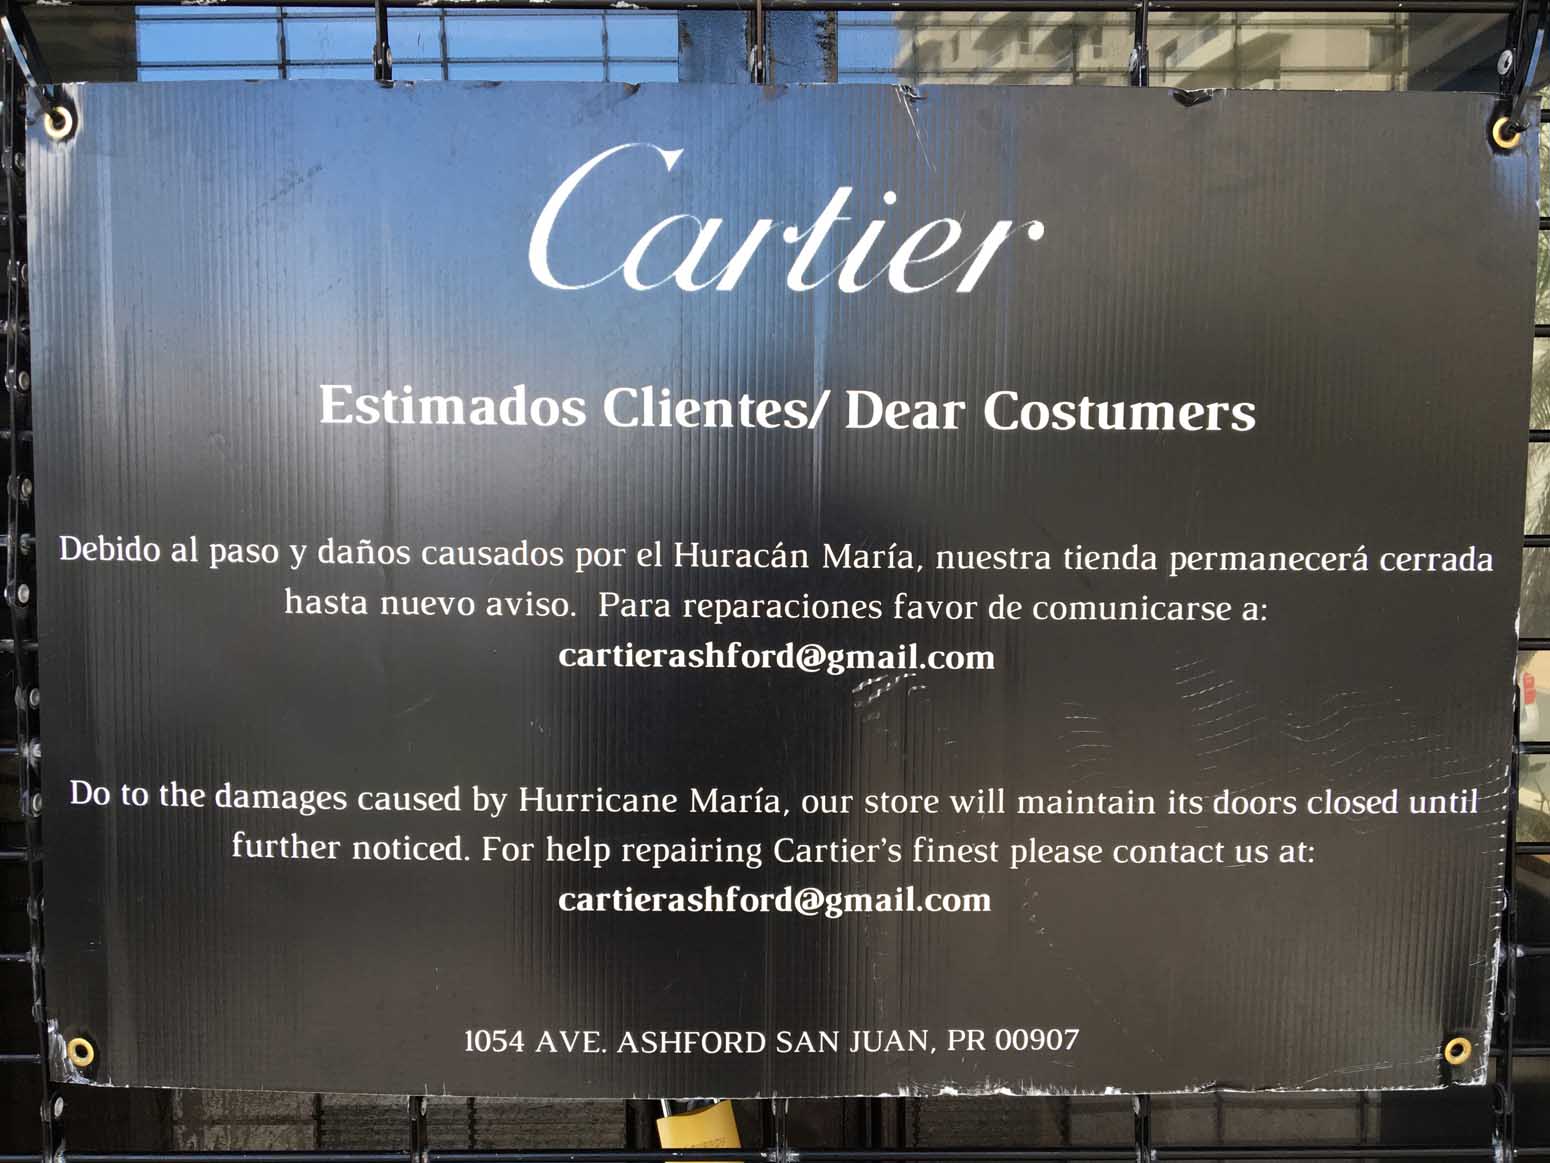 Cartier informing customers of their temporary closure